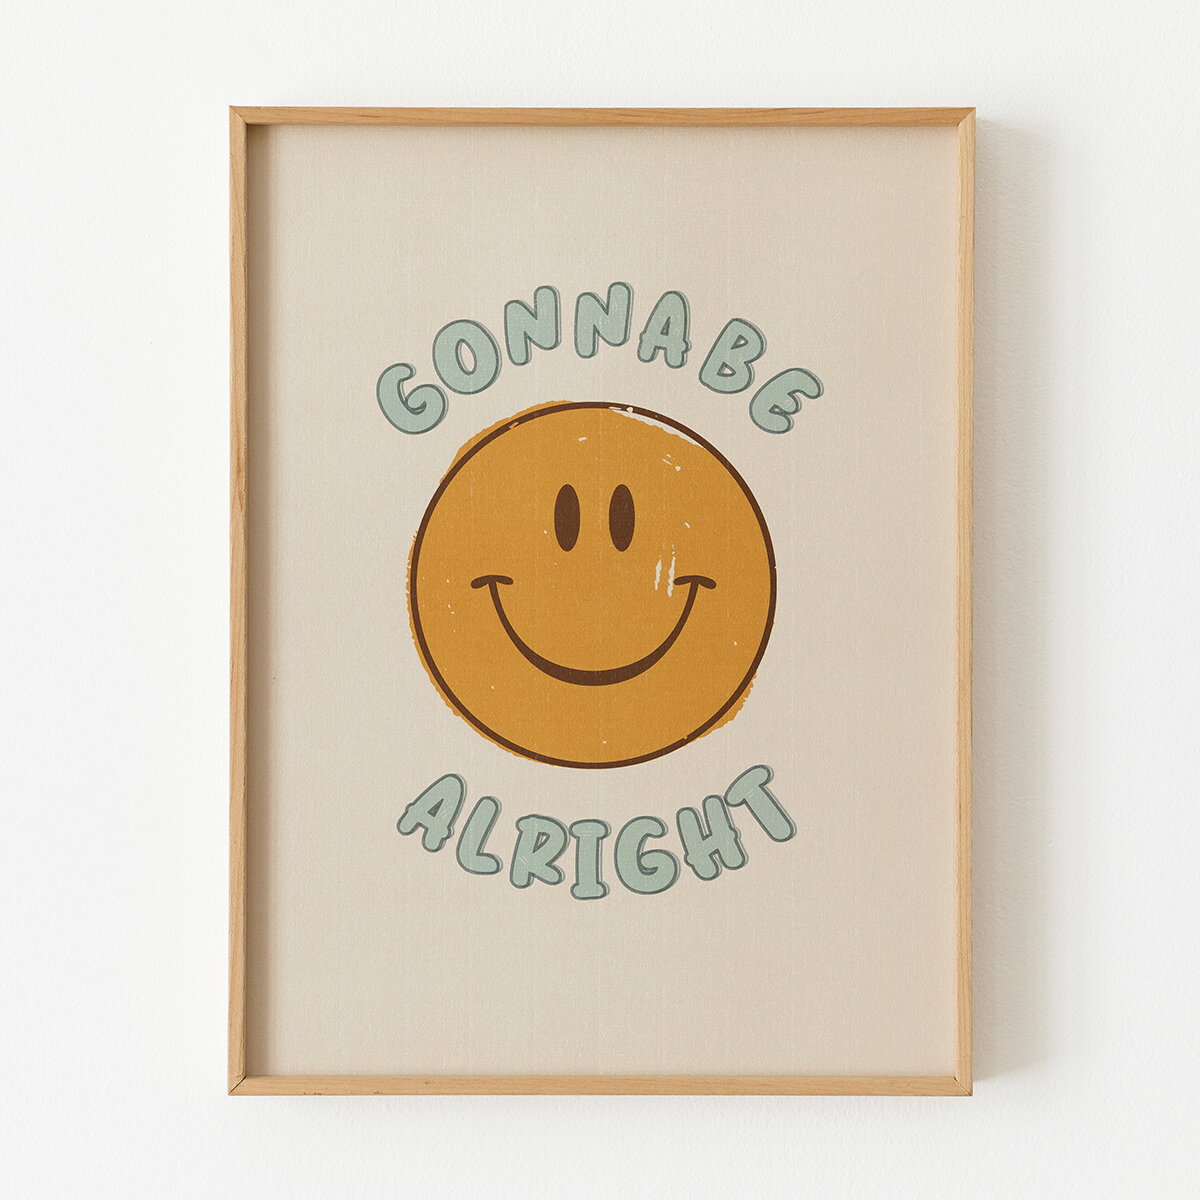 Smiley face poster